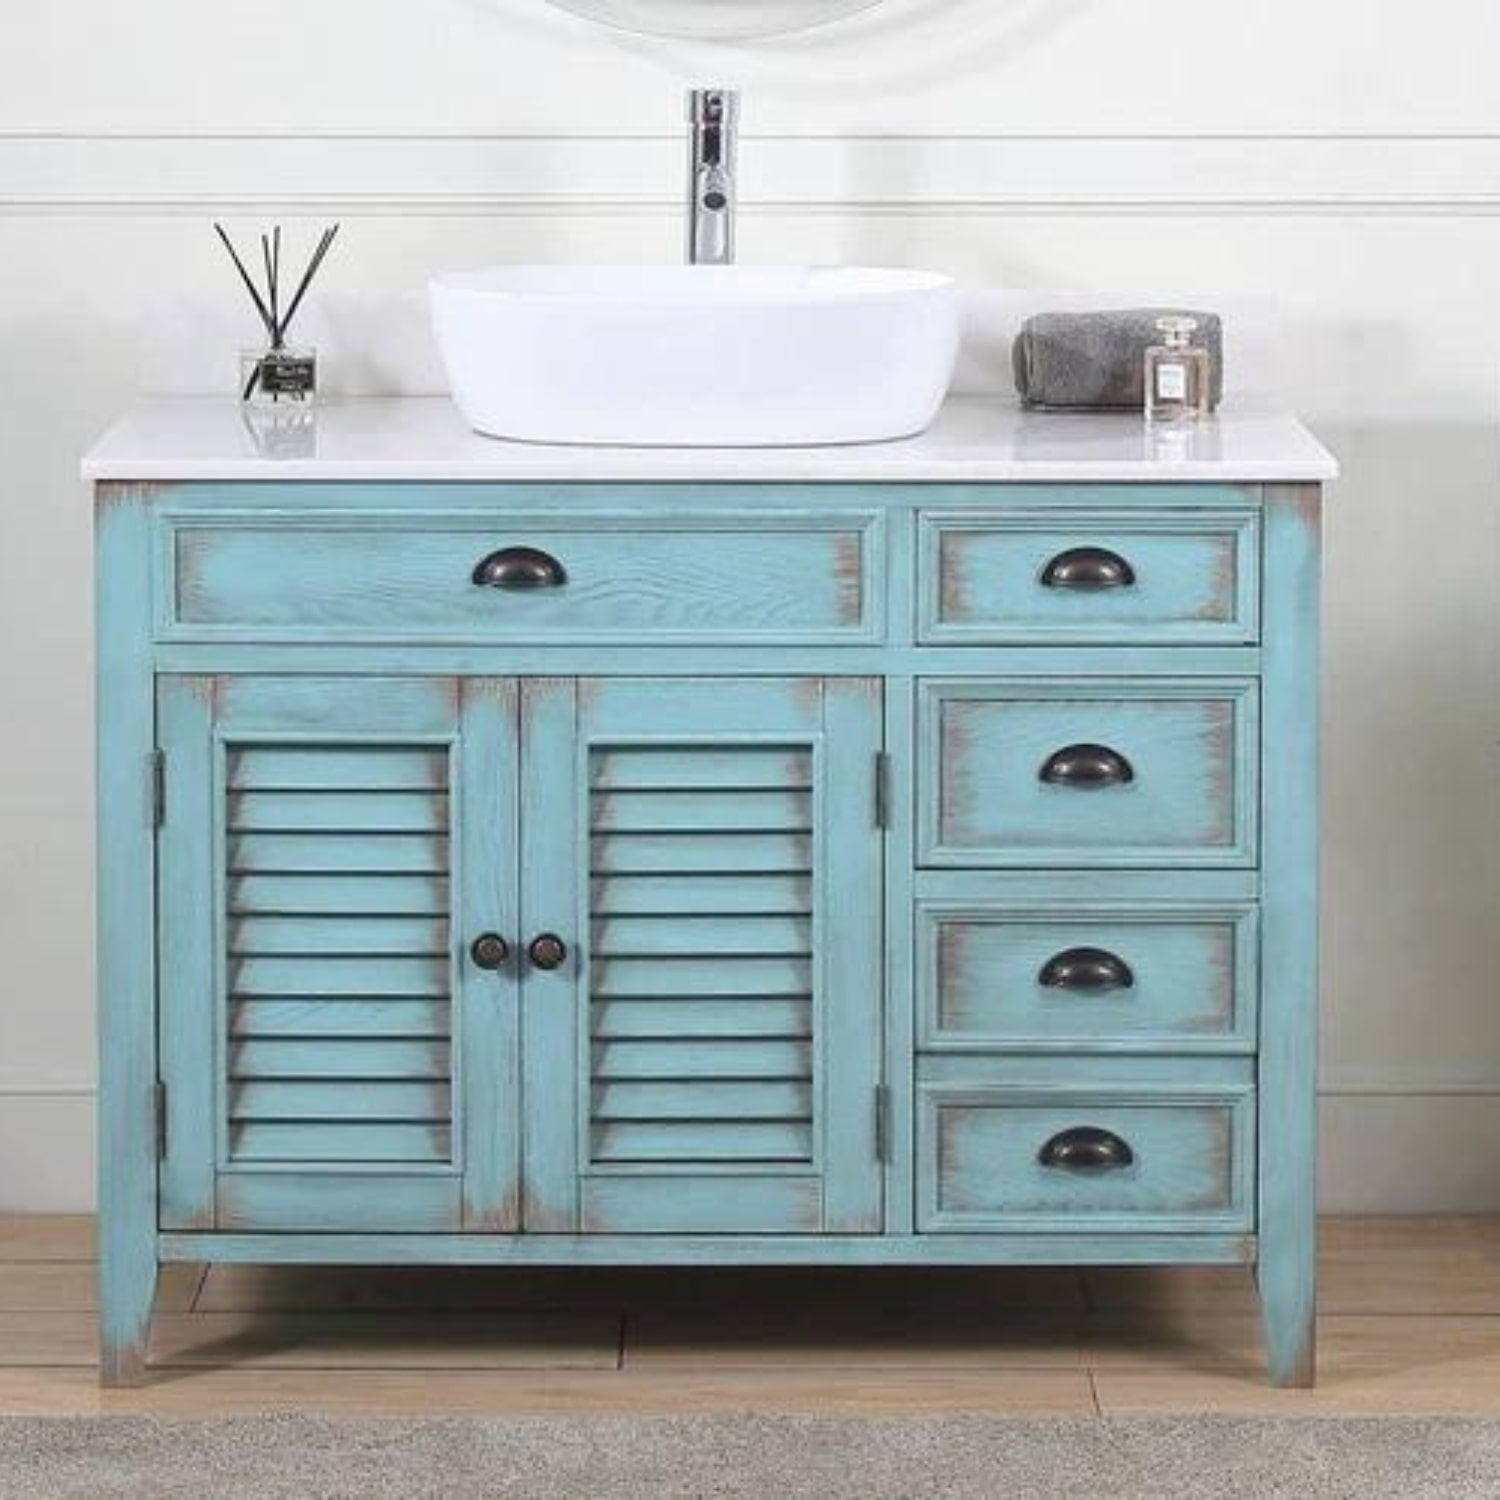 Abbeville 42" Distressed Light Blue Vanity with Vessel Sink - Traditional Bathroom Vanity